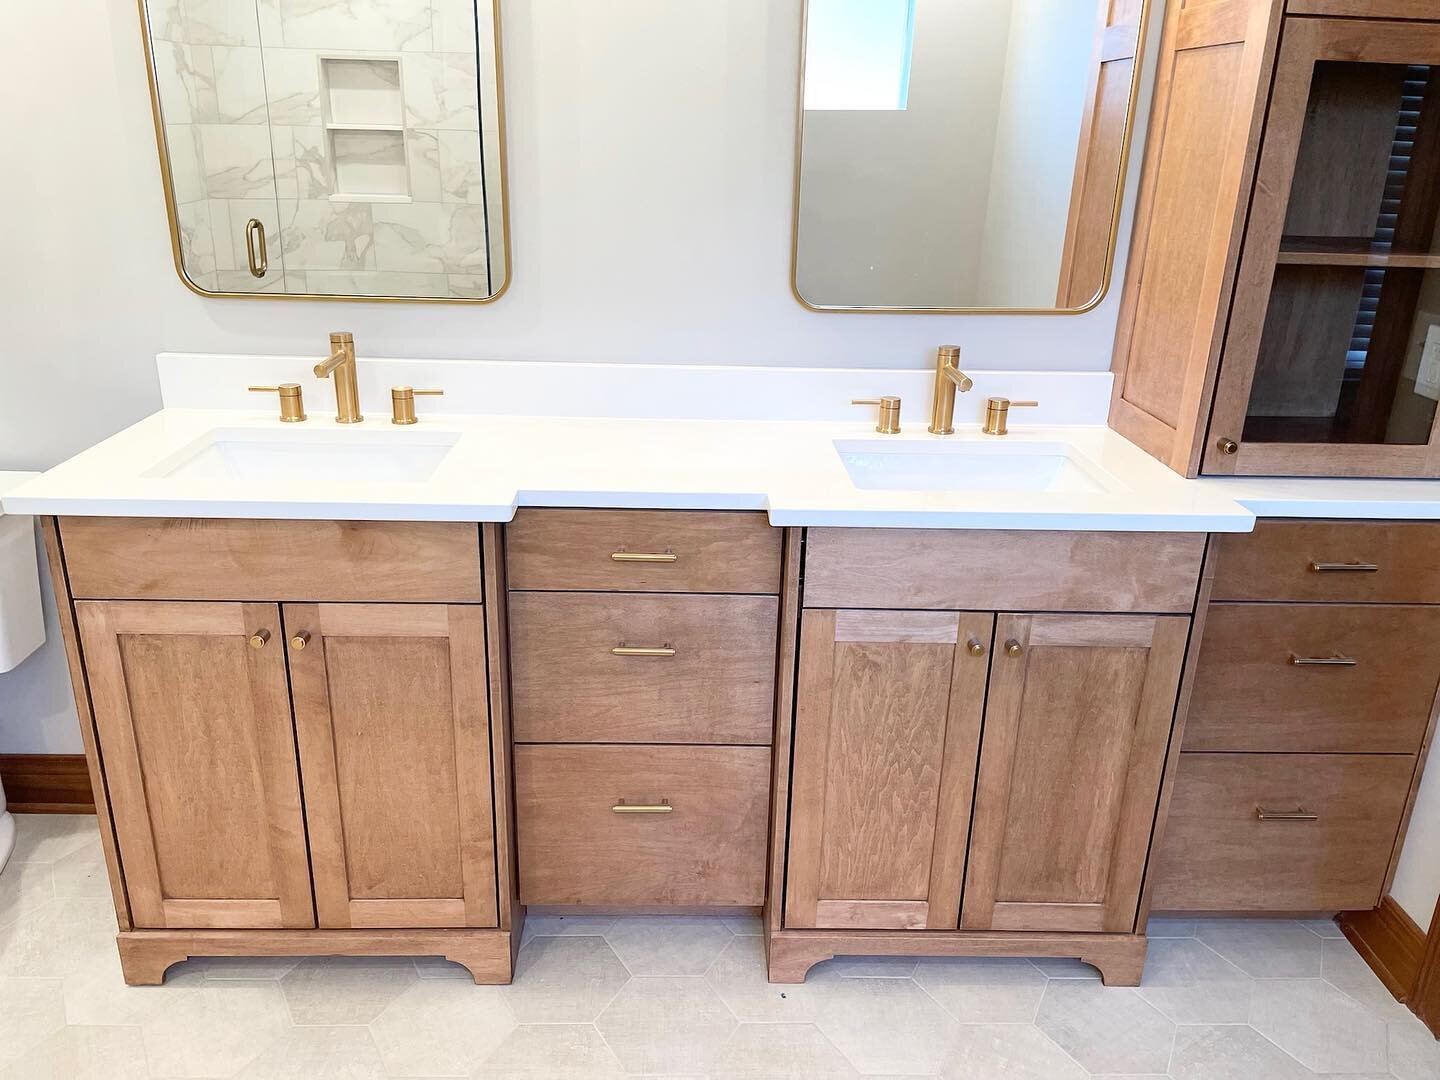 This gorgeous primary bathroom renovation involves adding modern amenities to create a luxurious experience with modern details. The centerpiece of the design is a stunning free-standing soaker tub that provides a relaxing soak after a long day. The 